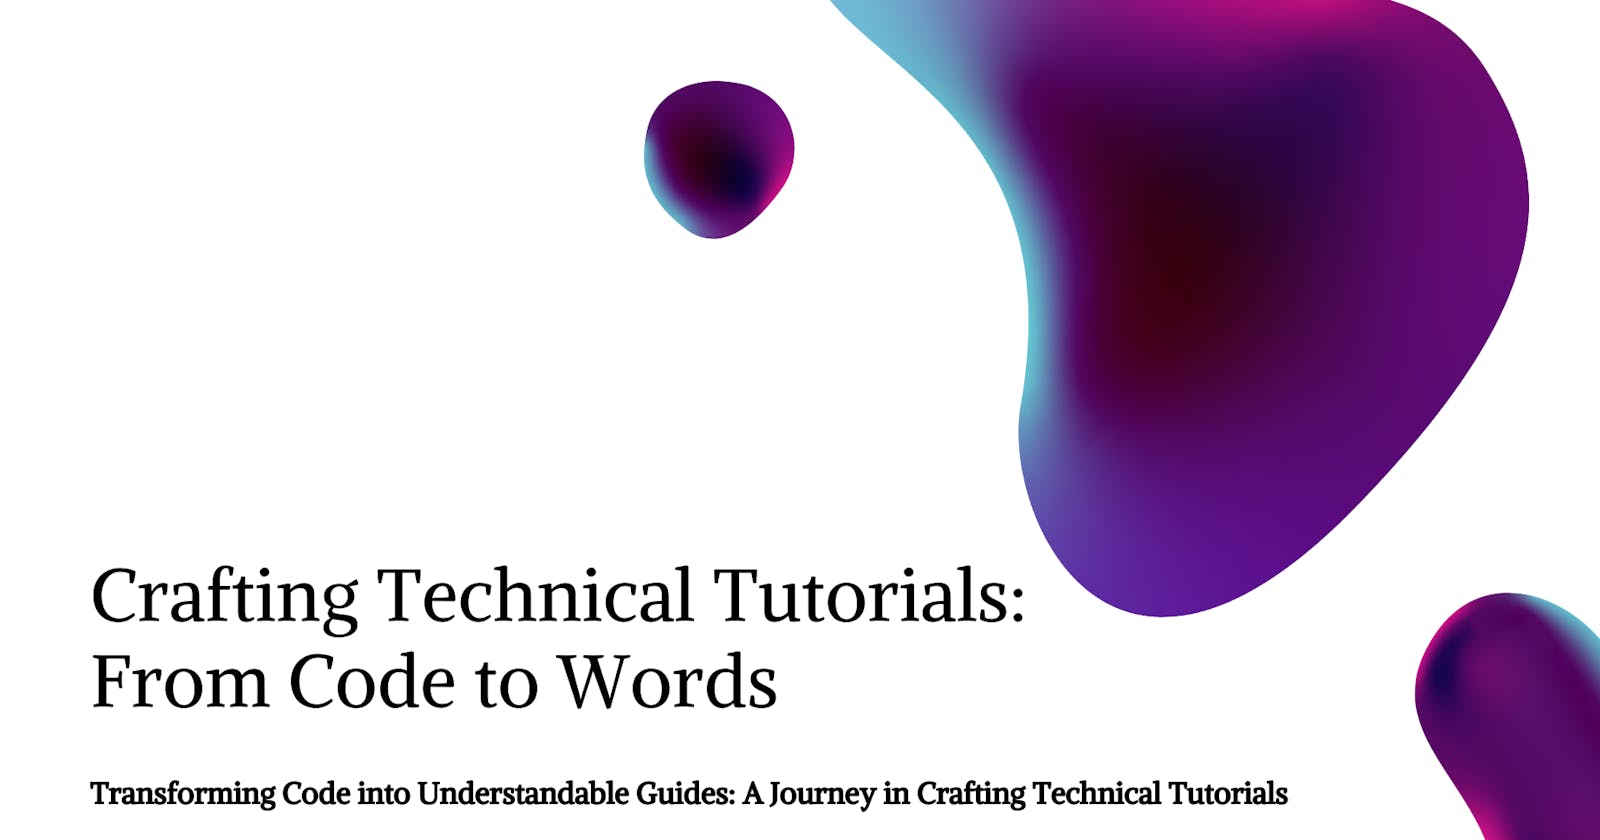 Crafting Technical Tutorials: From Code to Words